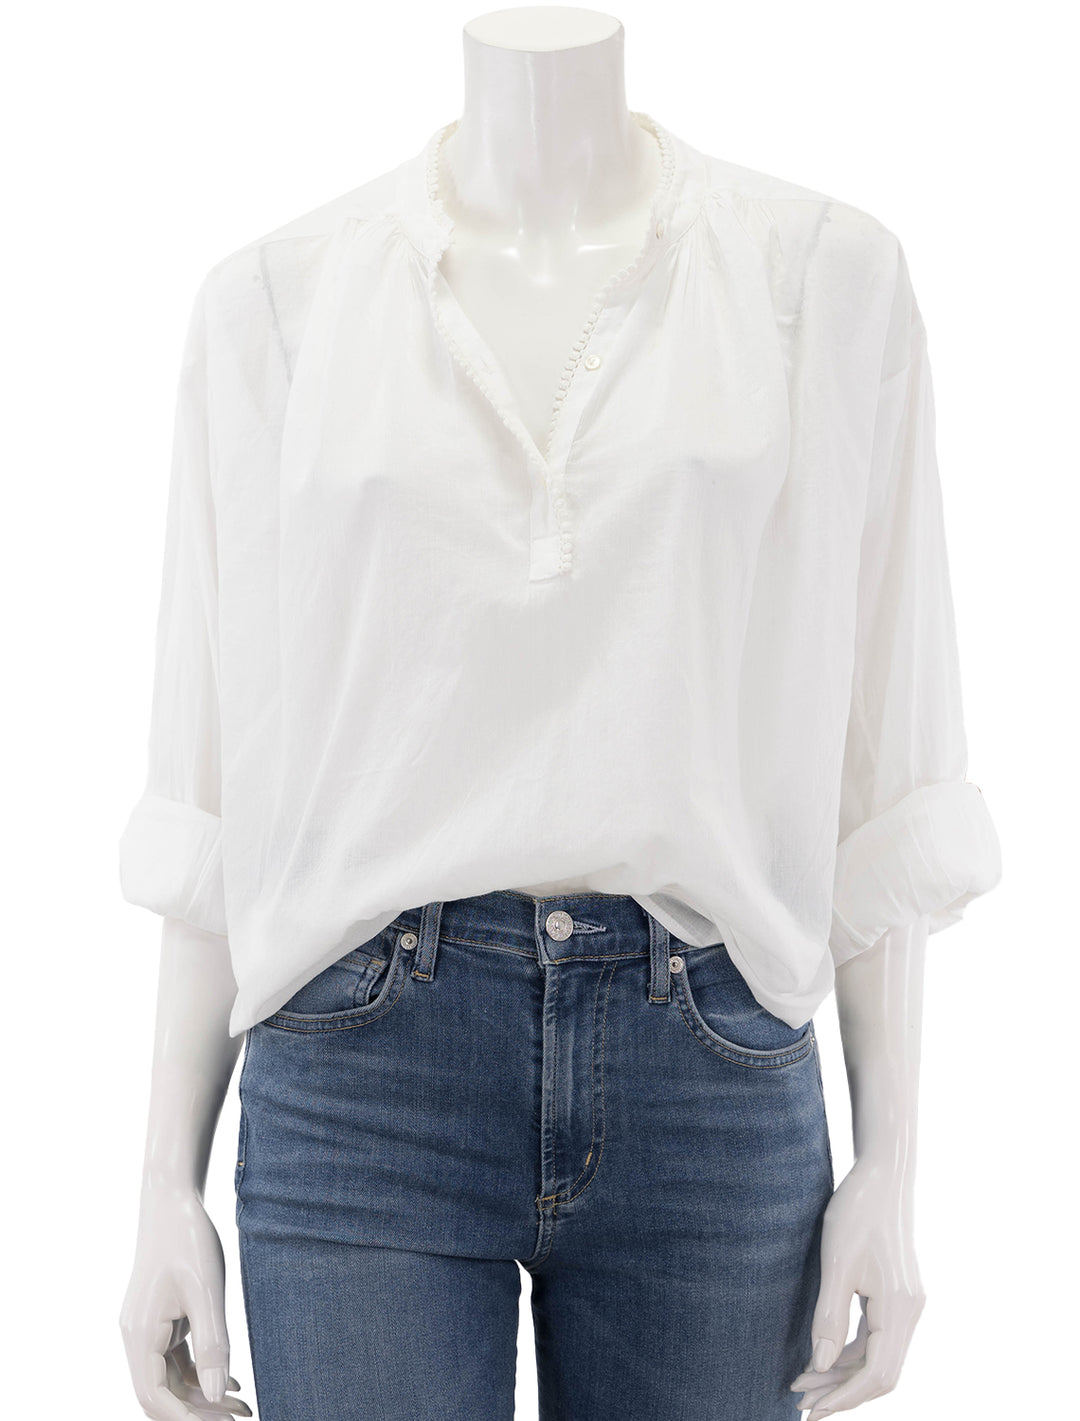 Front view of Nili Lotan's marcel top in ivory.